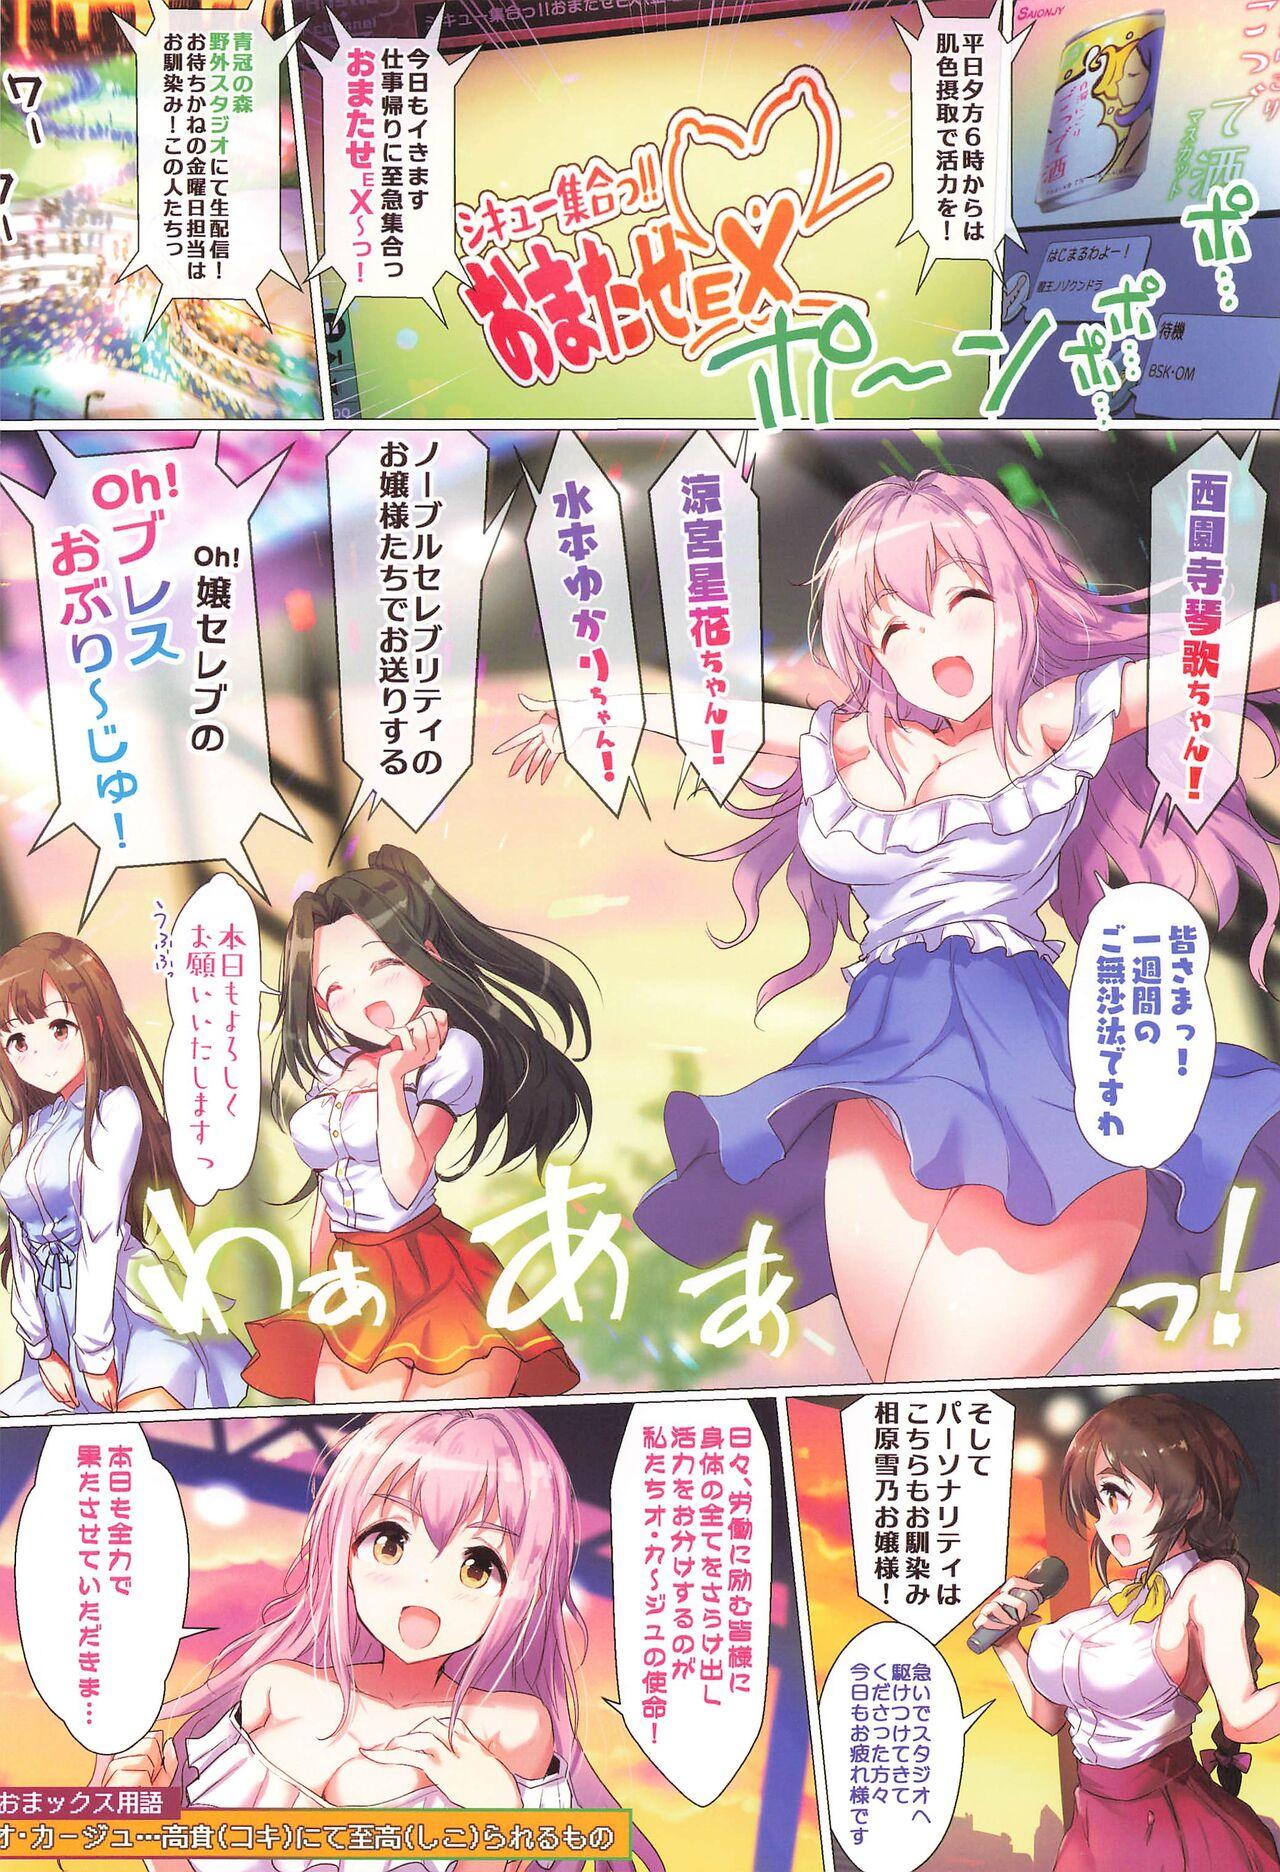 Flashing Oh! Jou Celeb no Oh! Blesse Oblige - The idolmaster Boys - Page 2